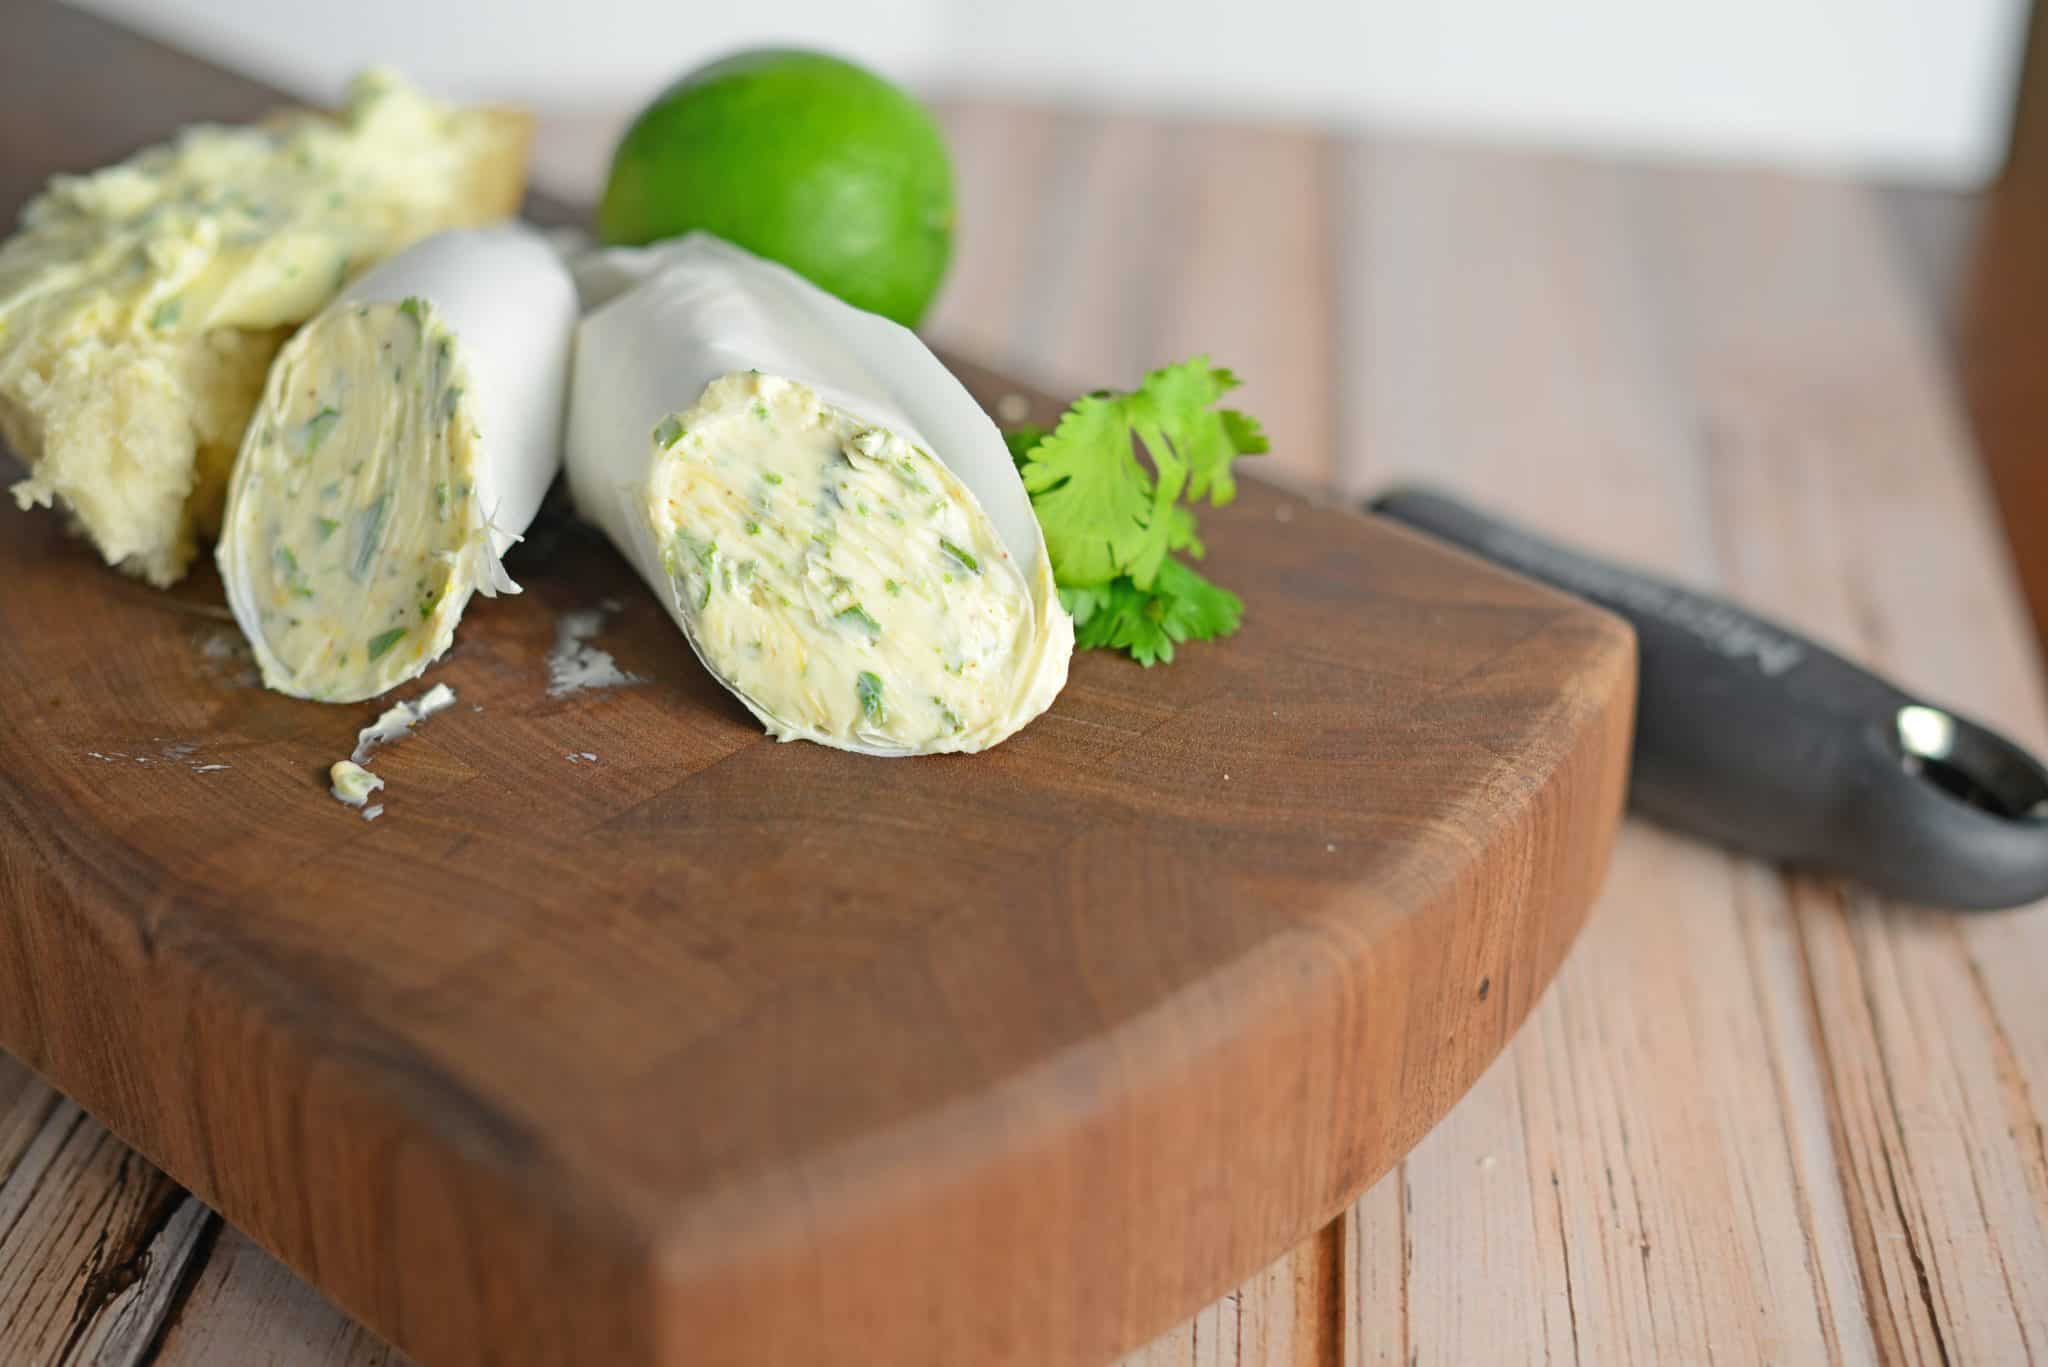 Chile Lime Butter- a zesty blended butter perfect for corn on the cob and sautéing vegetables. #flavoredbutter #limebutter www.savoryexperiments.com